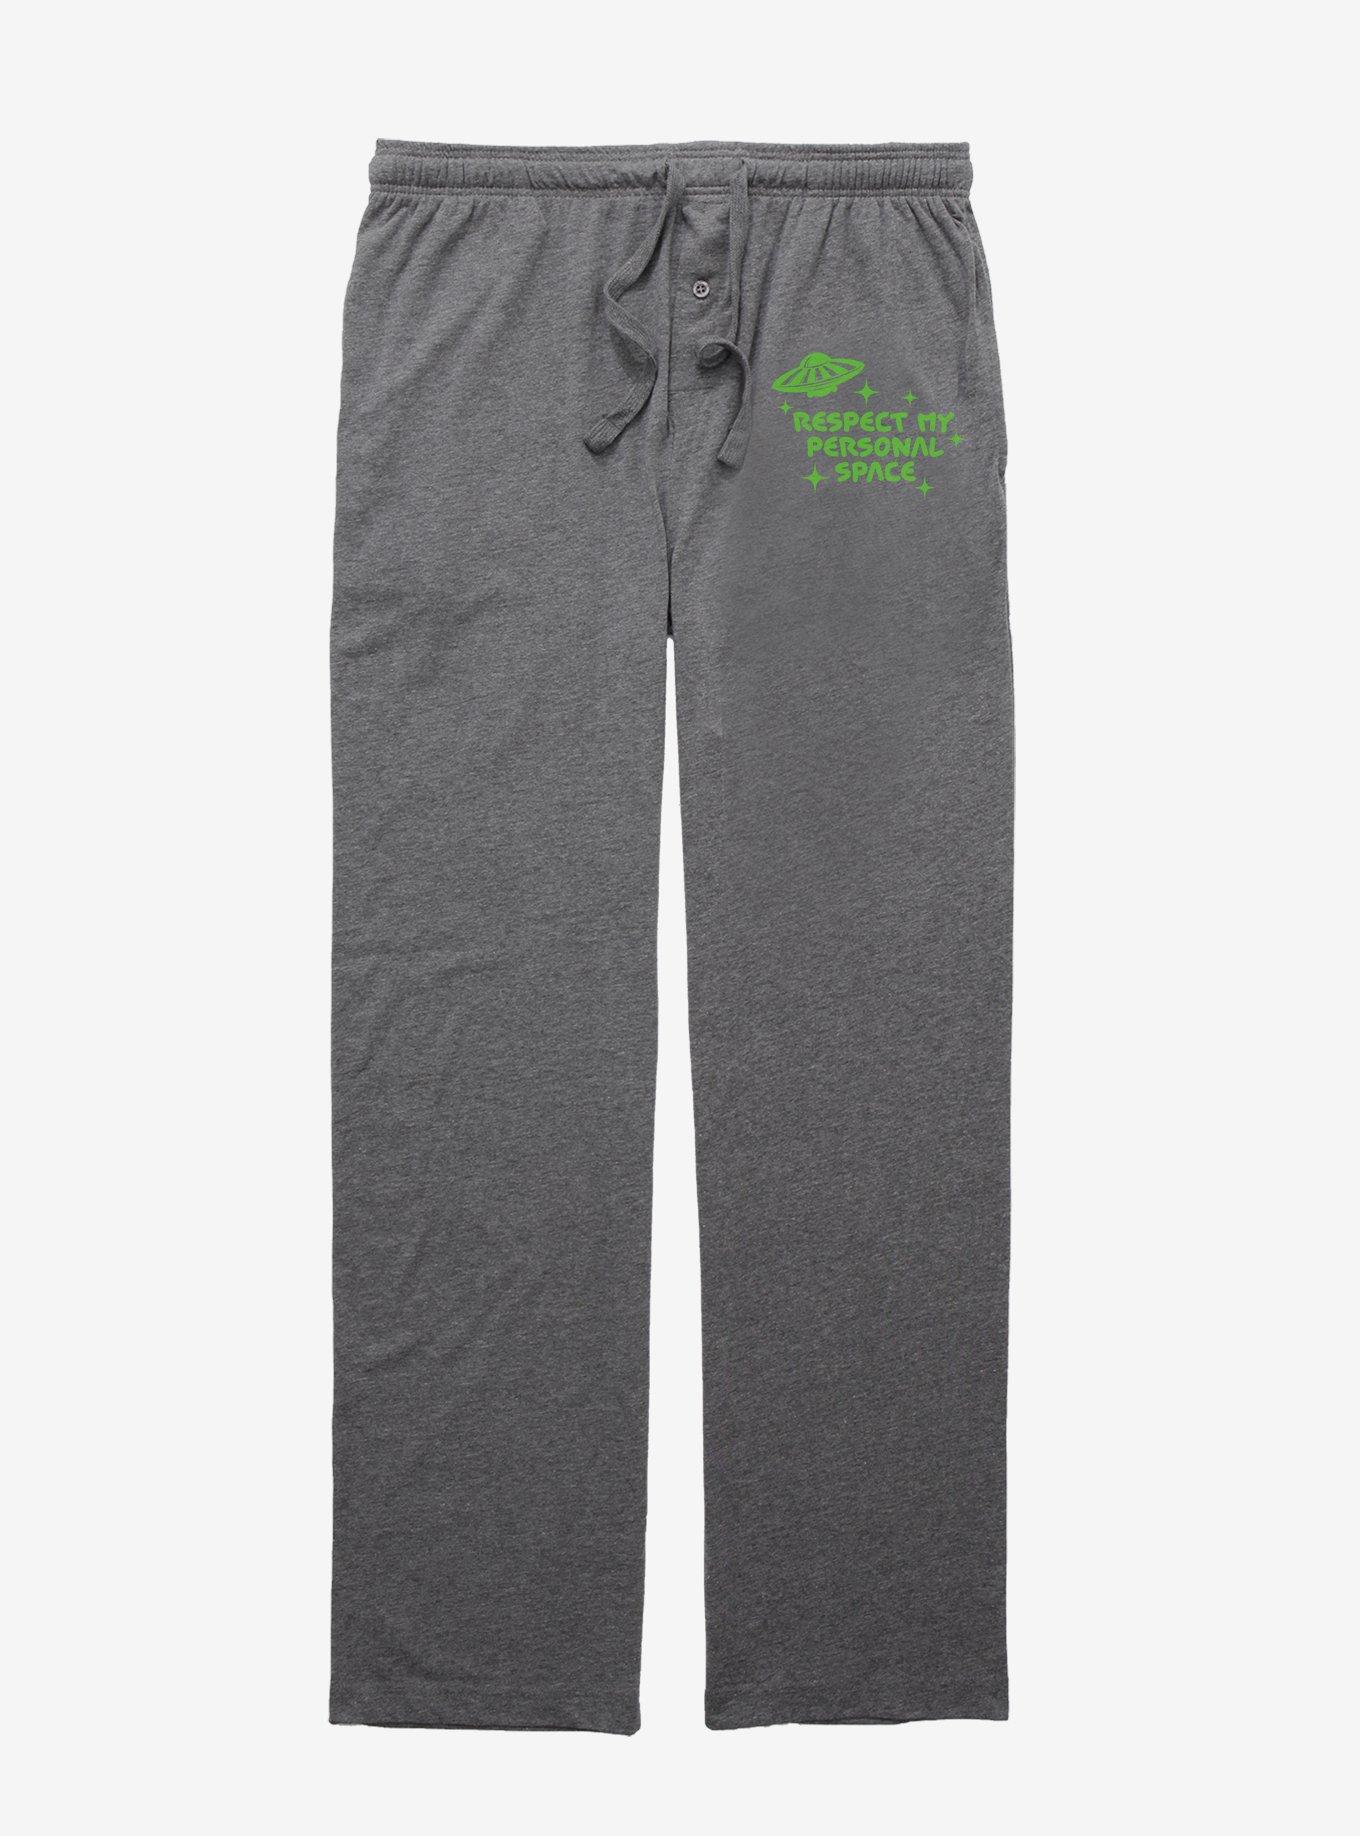 Cozy Collection Respect My Personal Space Pajama Pants, GRAPHITE HEATHER, hi-res